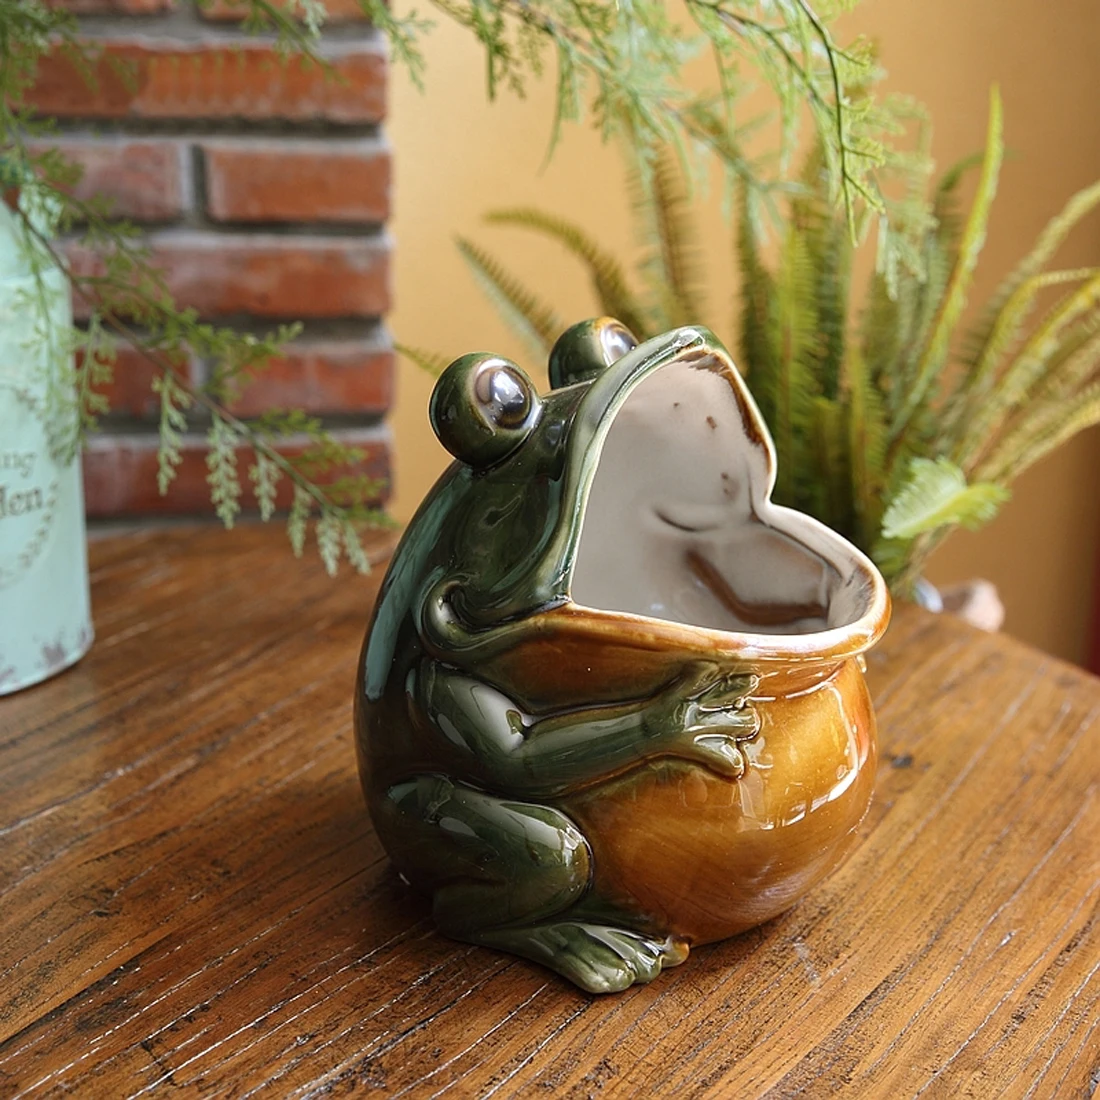 Creative Big Mouth Frog Foyer Lucky Savings Tank Hydroponic Flower Pot Pen Holder Storage Living Room Decoration Ornaments